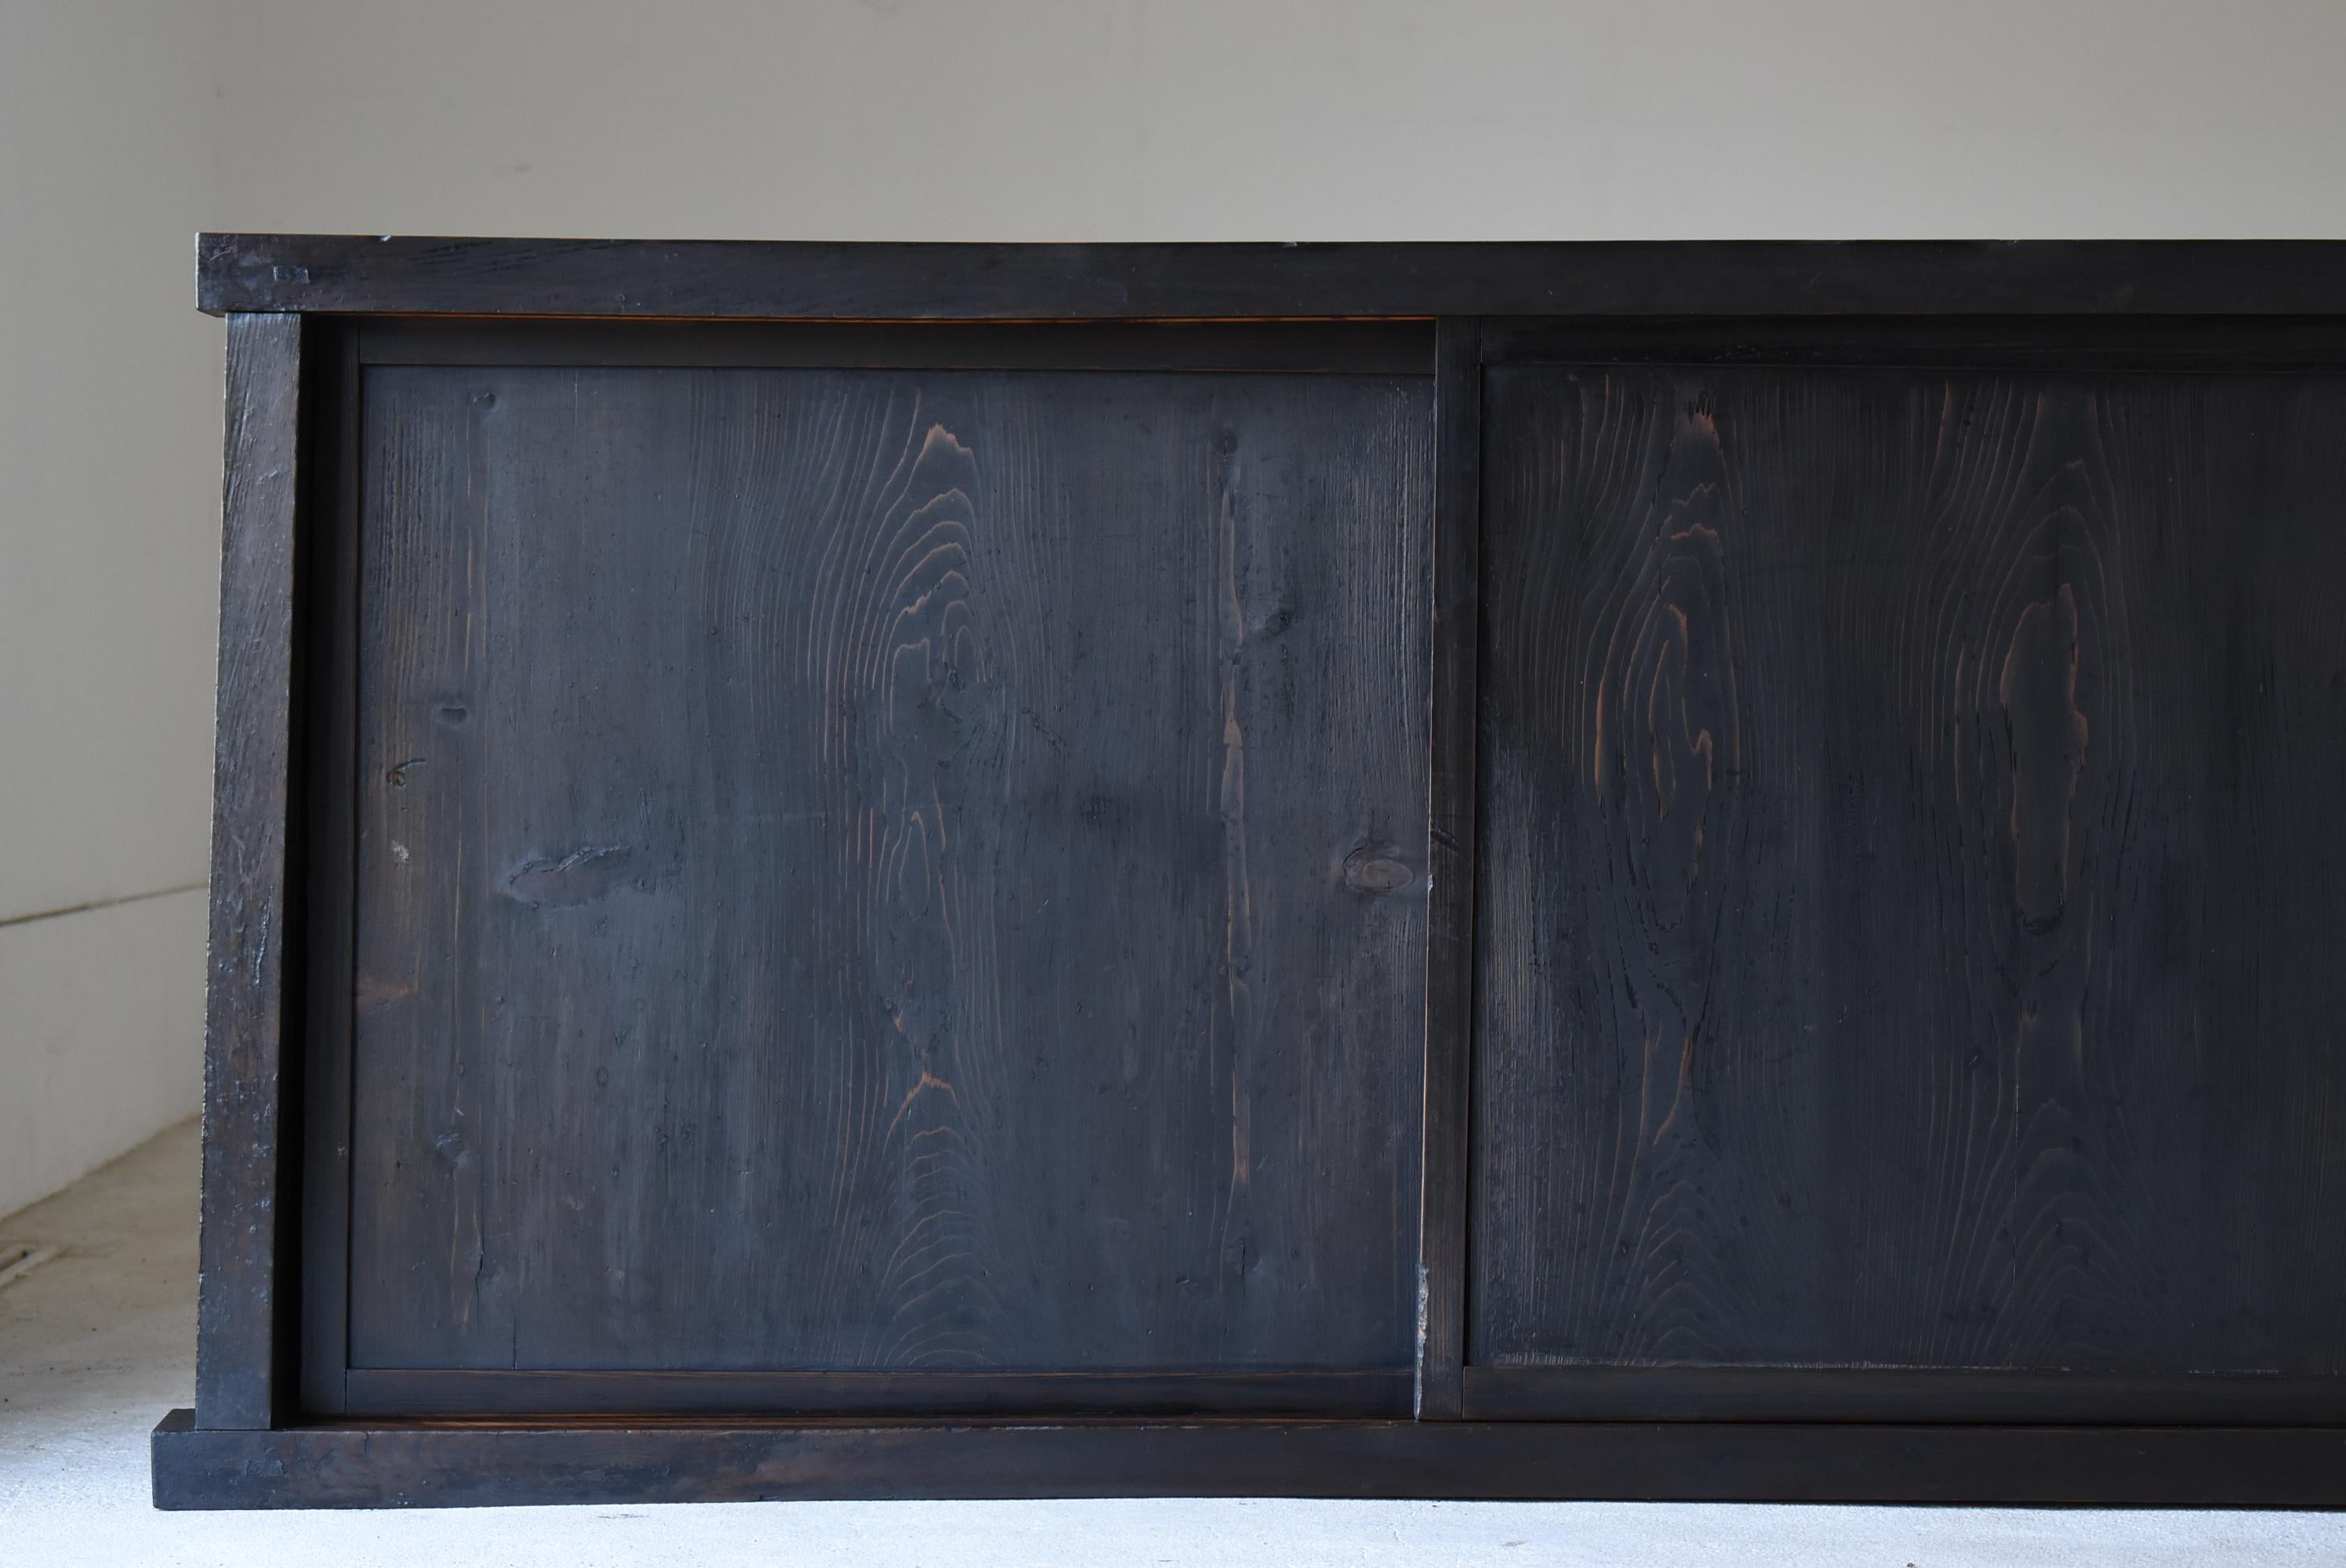 This is an old Japanese black large tansu.
It is from the Meiji period (1860s-1900s).
It is made of cedar wood.
It is very rare.

It is simple and cool with no unnecessary decoration.
It is the ultimate in simplicity.
This is beautiful in